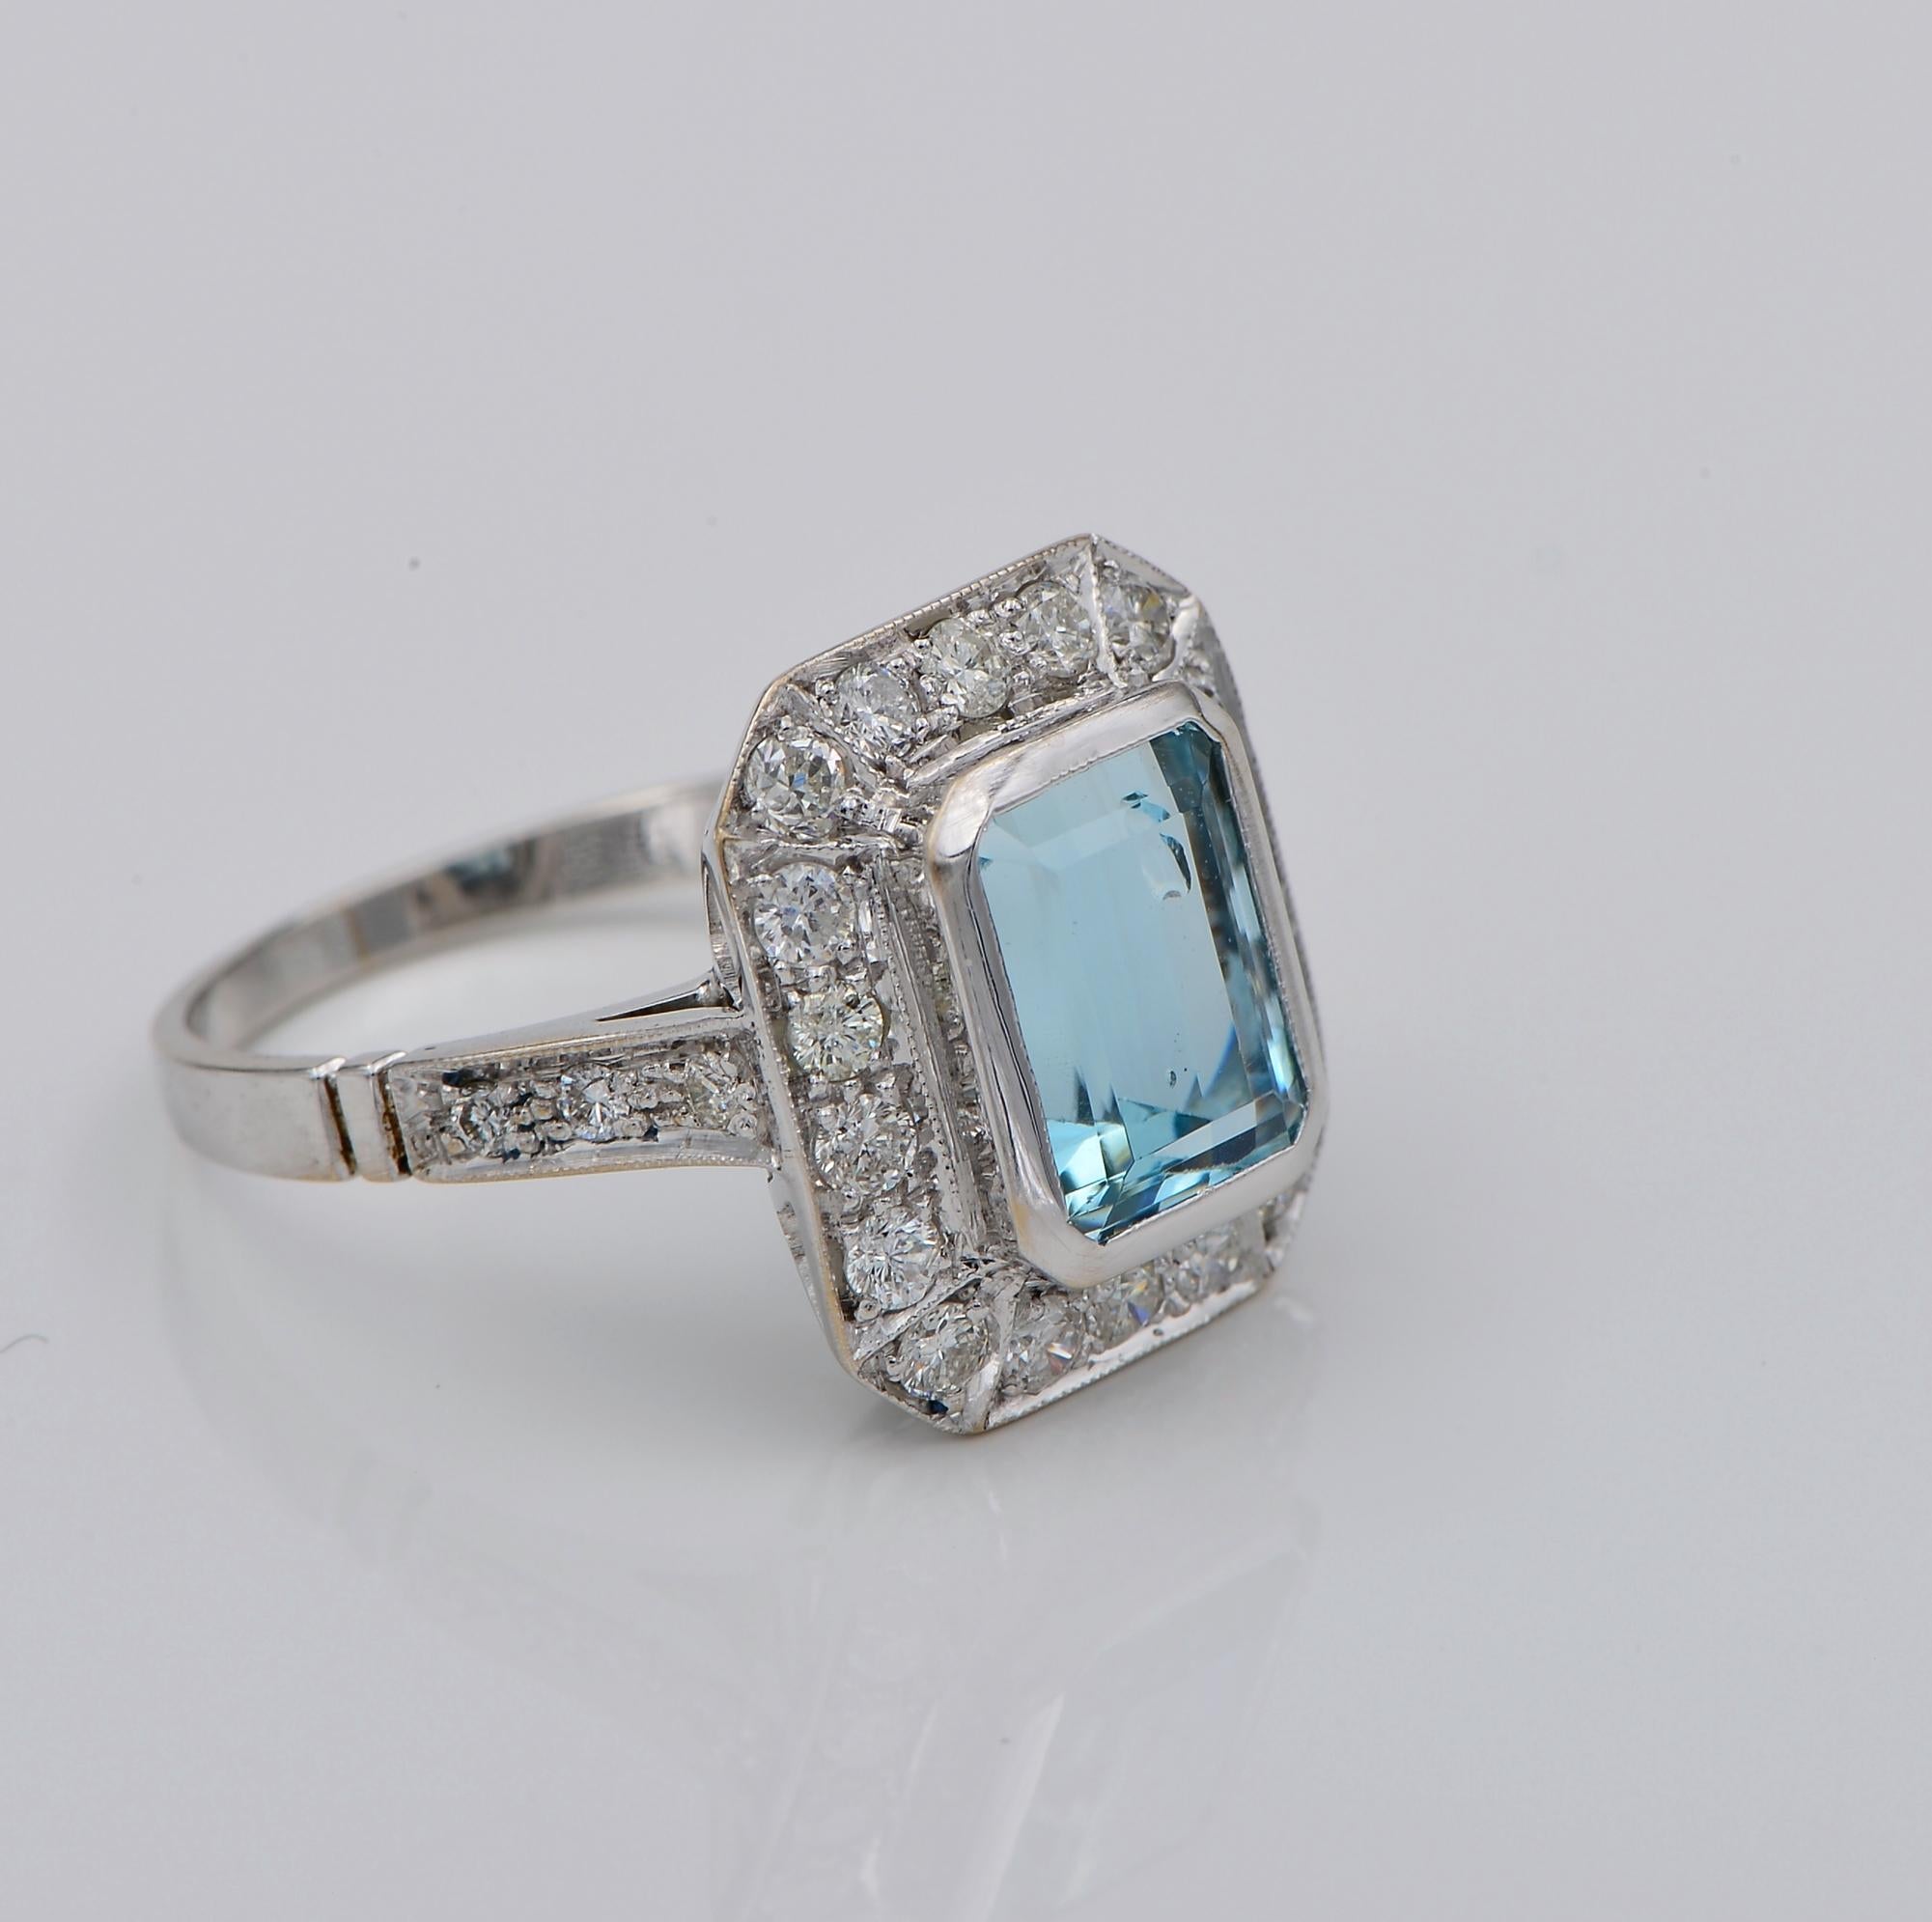 This classy vintage ring is Art deco style 1970 ca
Well hand made as unique of solid 18 Kt white gold
Beautiful octagonal shape crown given by the centre Aquamarine with a gorgeous fret work on the reverse side and rich Diamond complement
Aquamarine